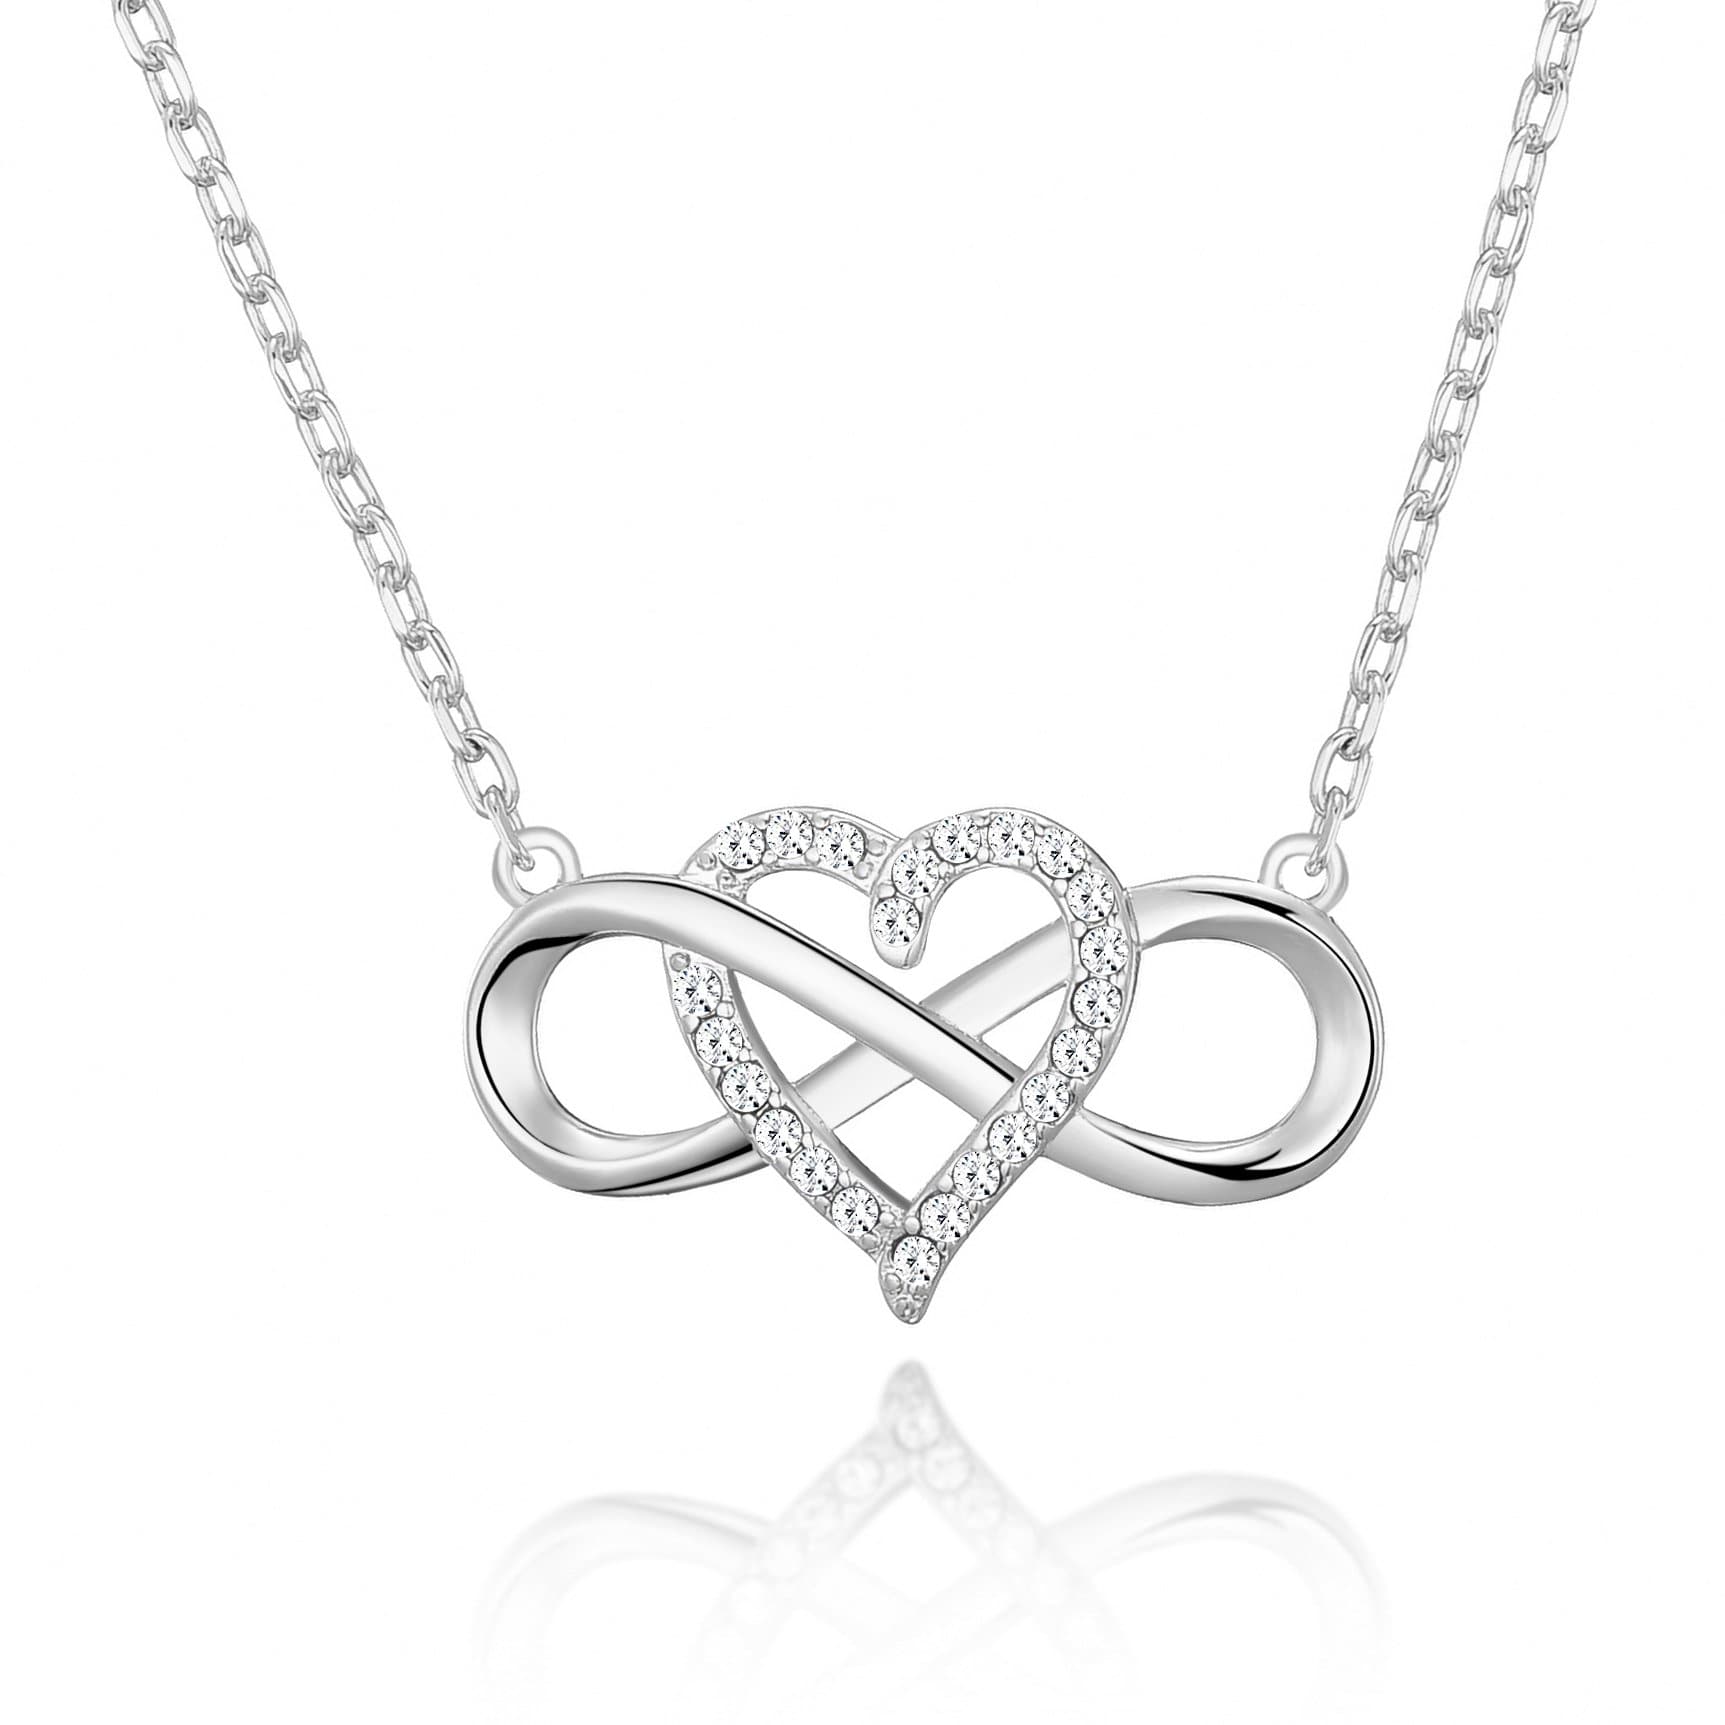 Silver Plated Infinity Heart Necklace Created with Zircondia® Crystals by Philip Jones Jewellery